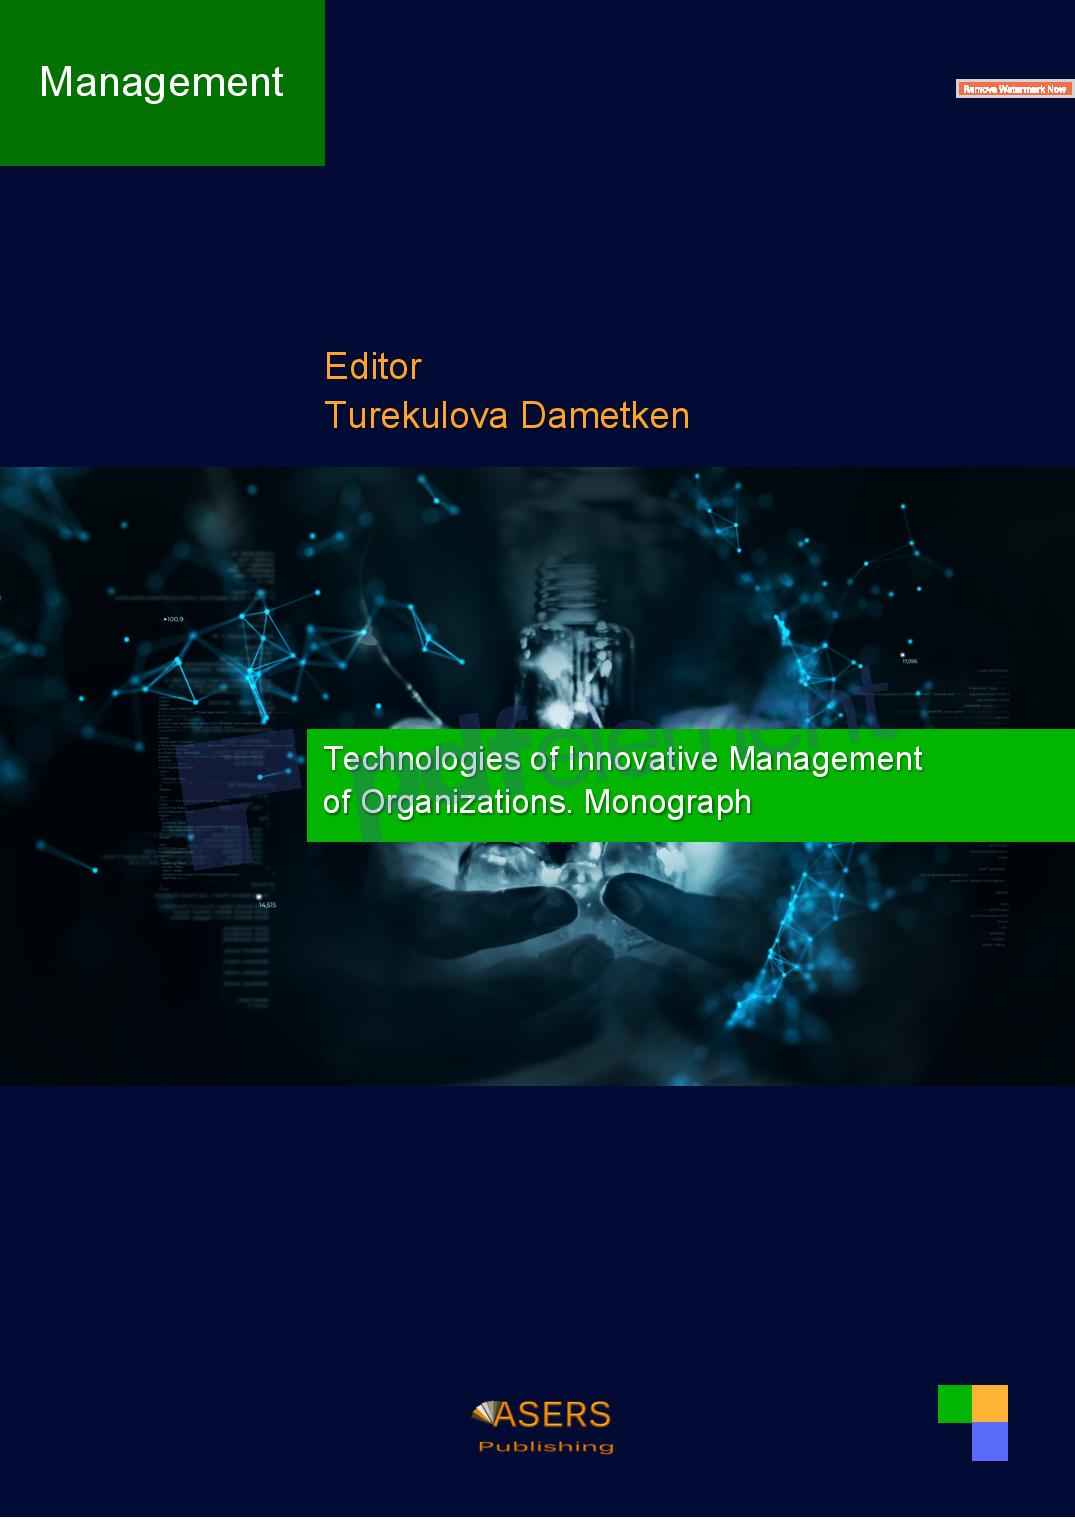 Business Process Reengineering as an Innovative Technology of Organization Management Cover Image